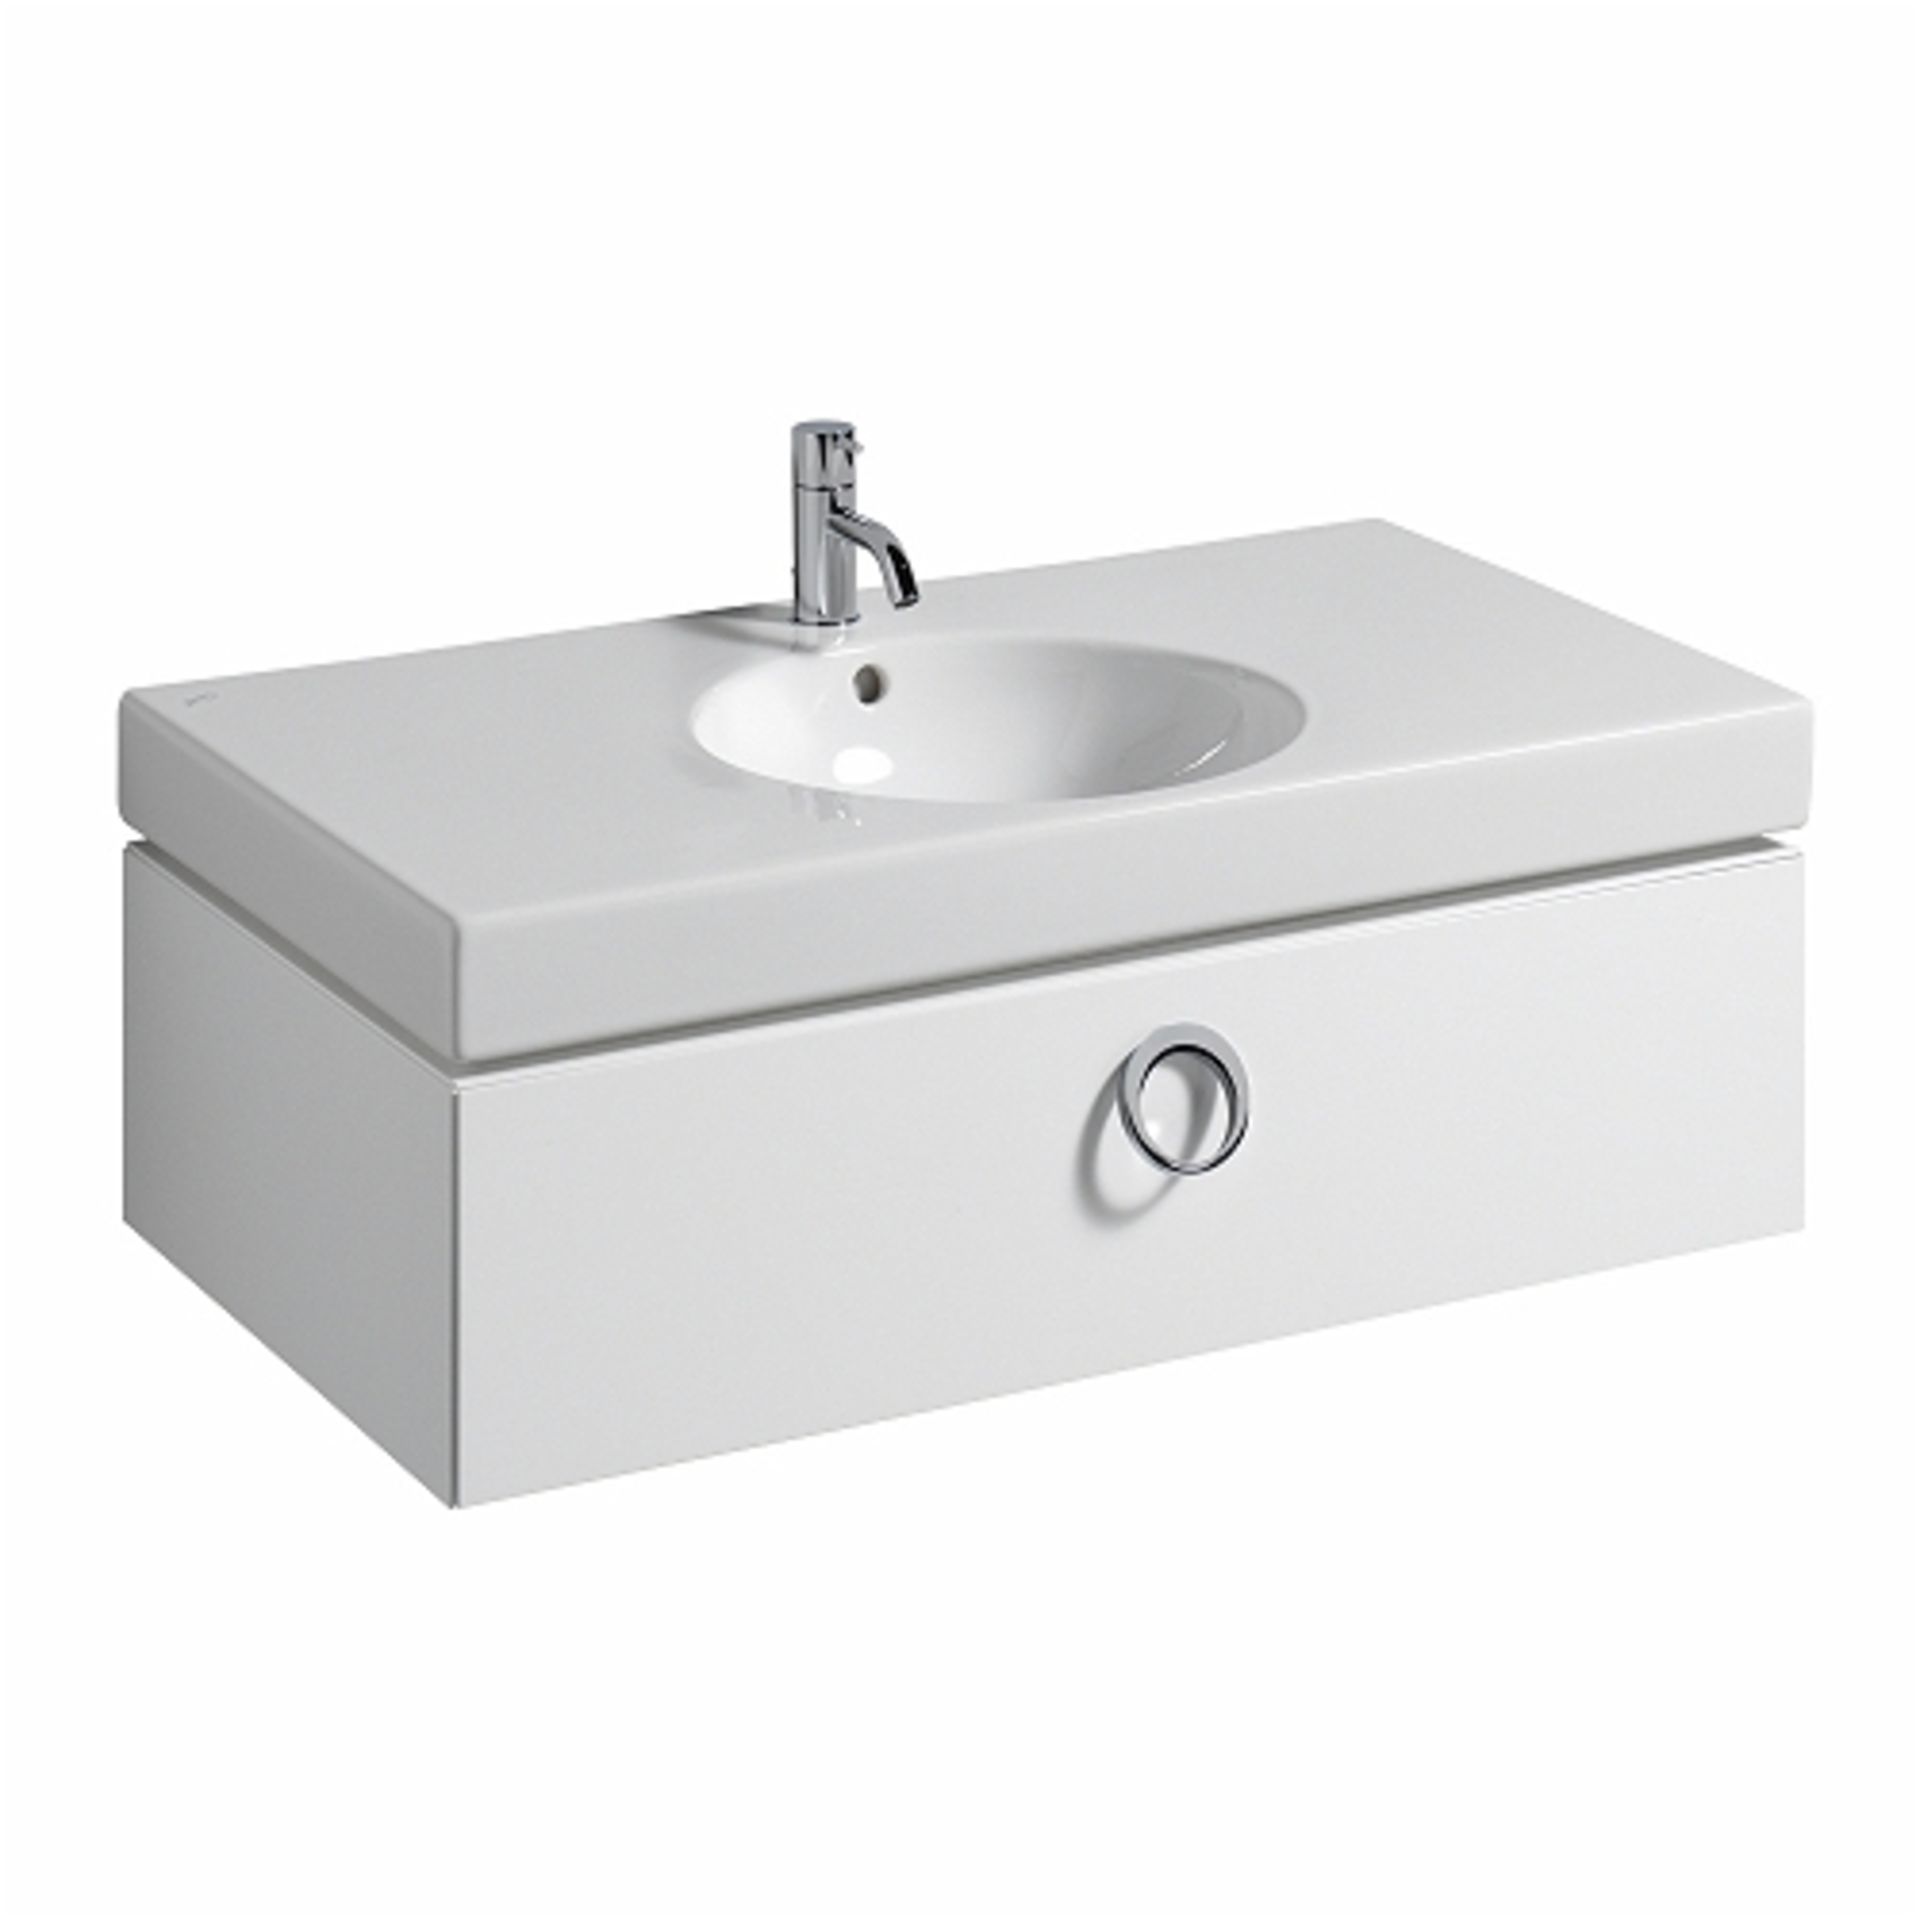 (XL90) Keramag Preciosa II Vanity Unit. RRP £1,020.99. Comes complete with basin. White high g...( - Image 2 of 5